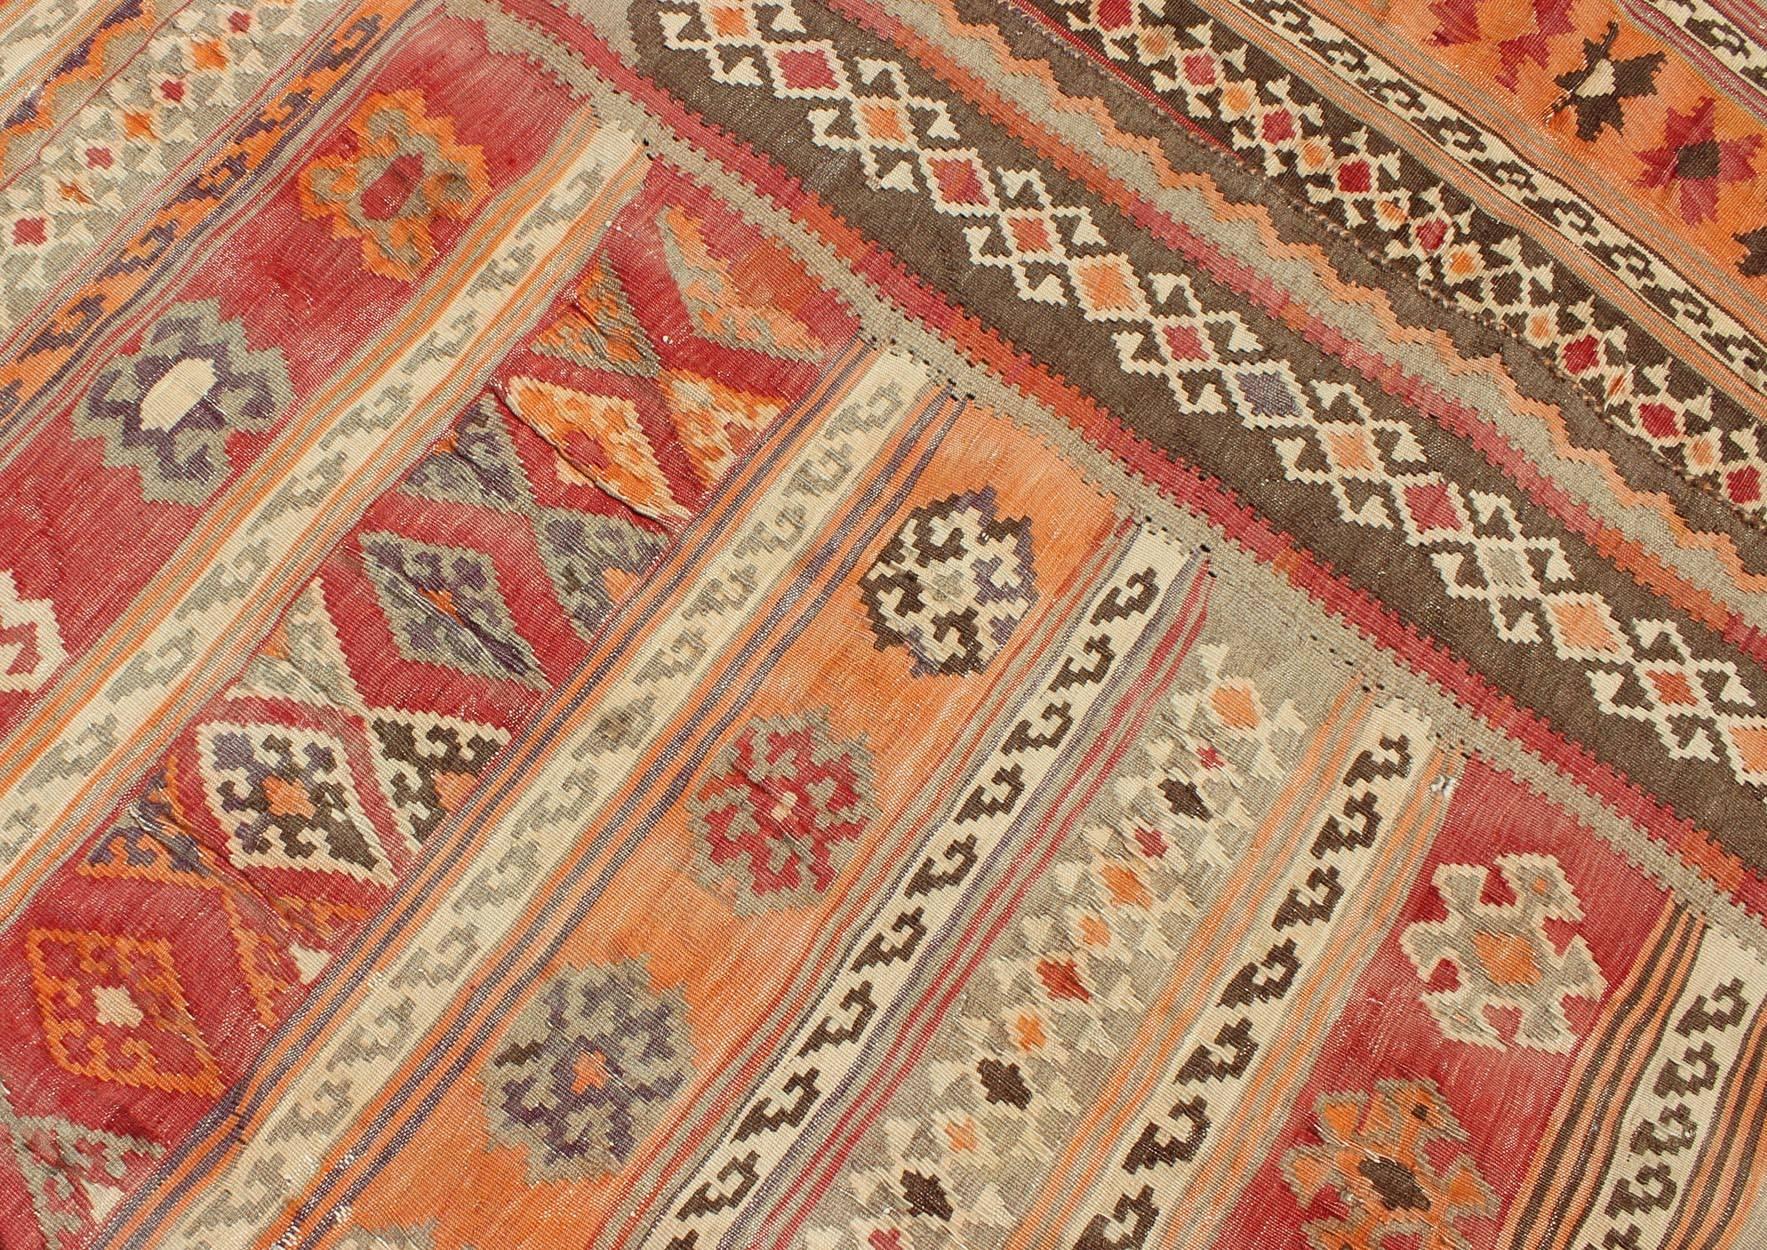 Antique Moroccan Kilim with Embroidery in Red, Orange, Gray and Brown For Sale 5